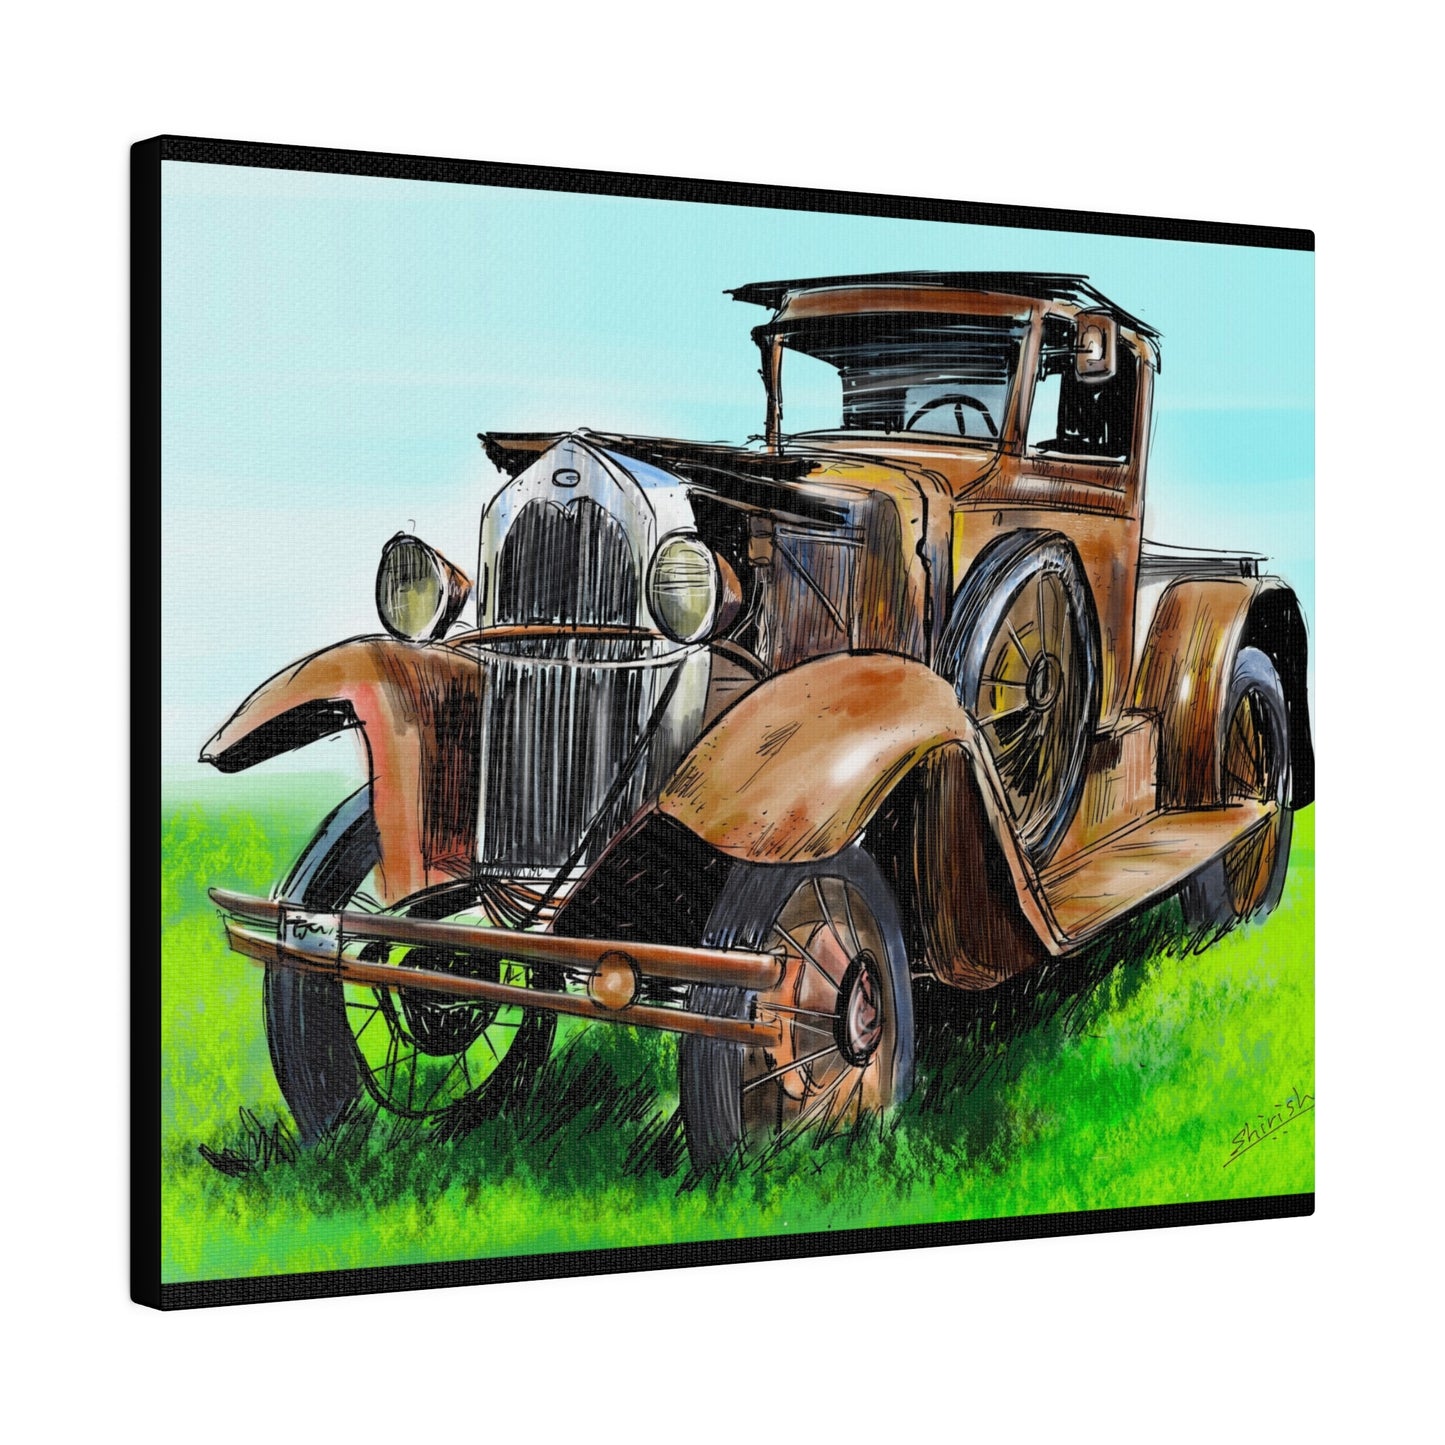 The Old Rusty Car - Canvas Print